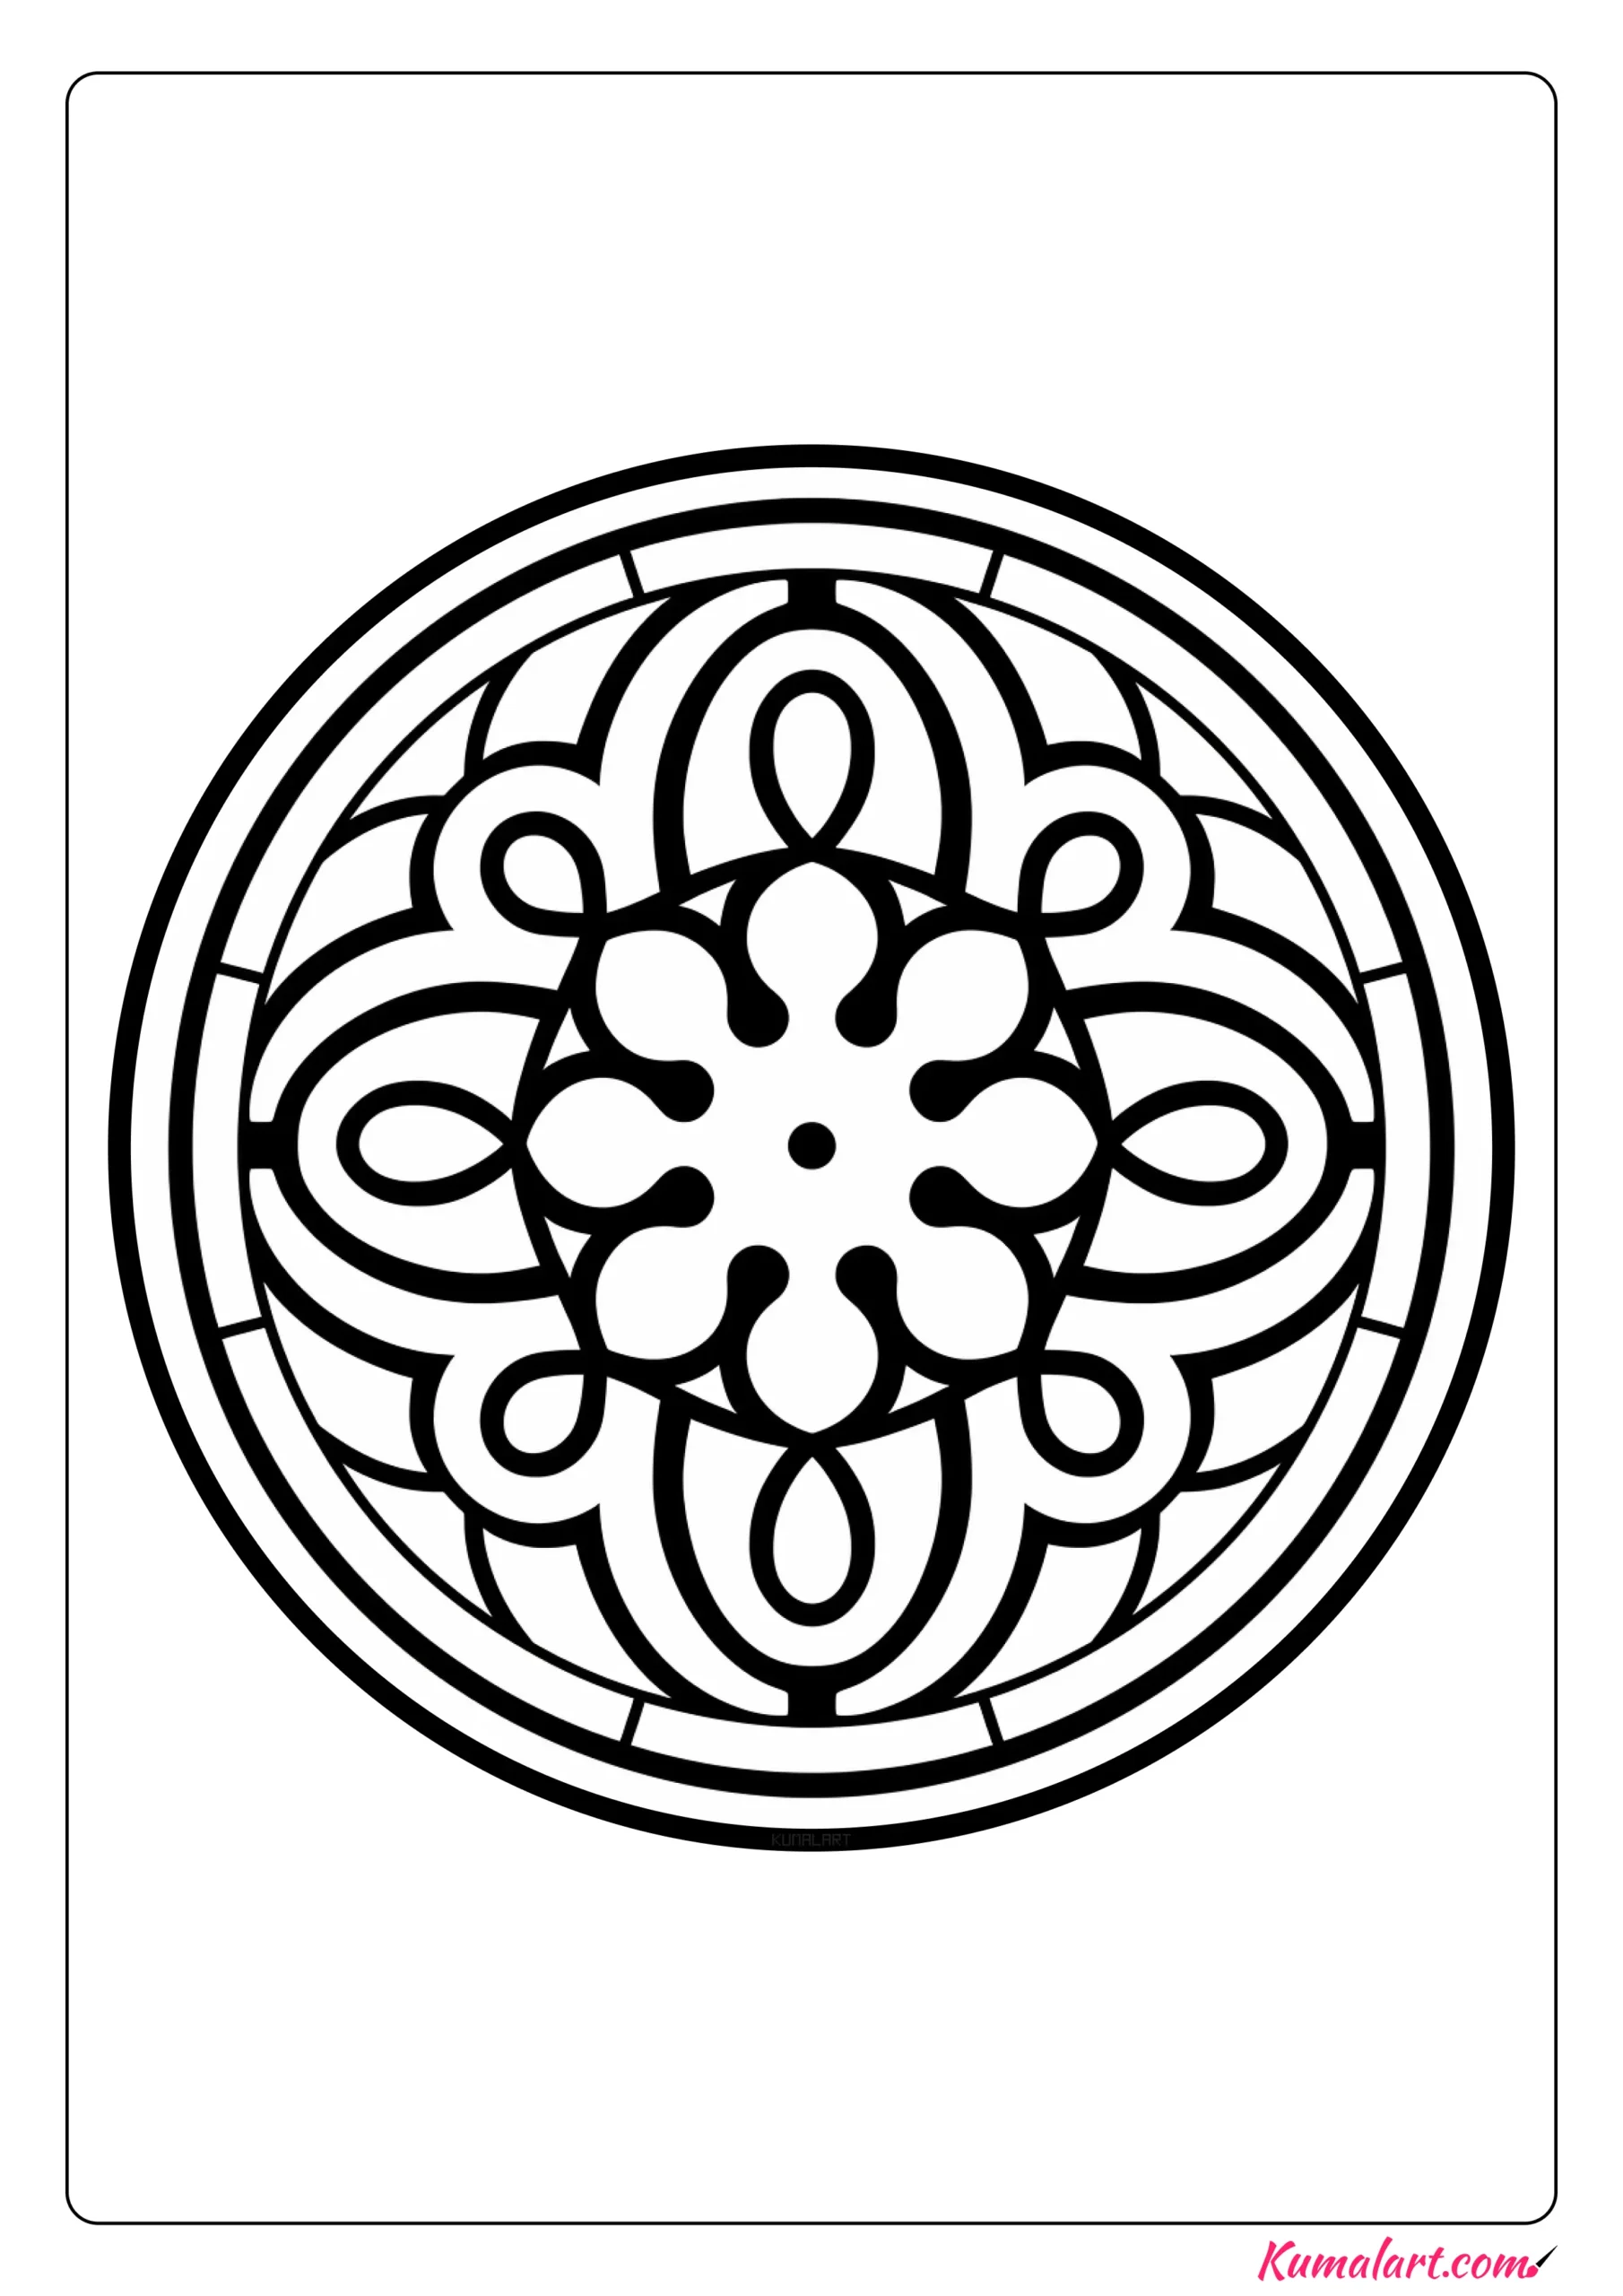 Relief Abstract Coloring Page